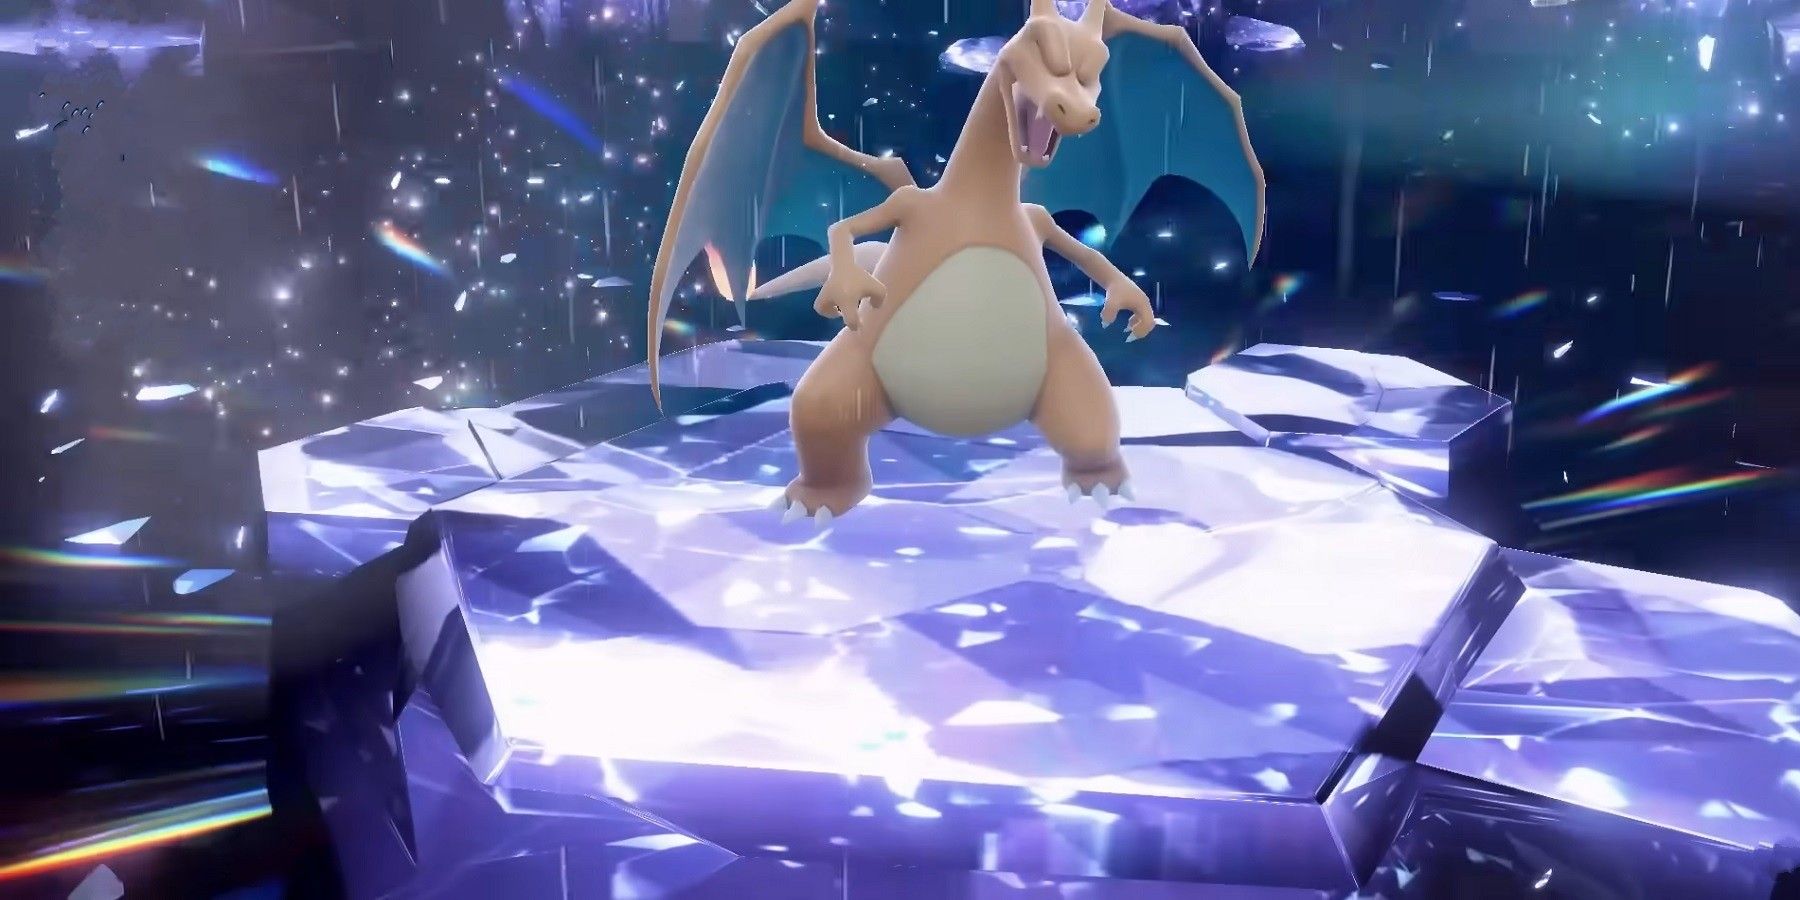 Pokémon Scarlet and Violet's Charizard raid is back — here's how to win -  Polygon